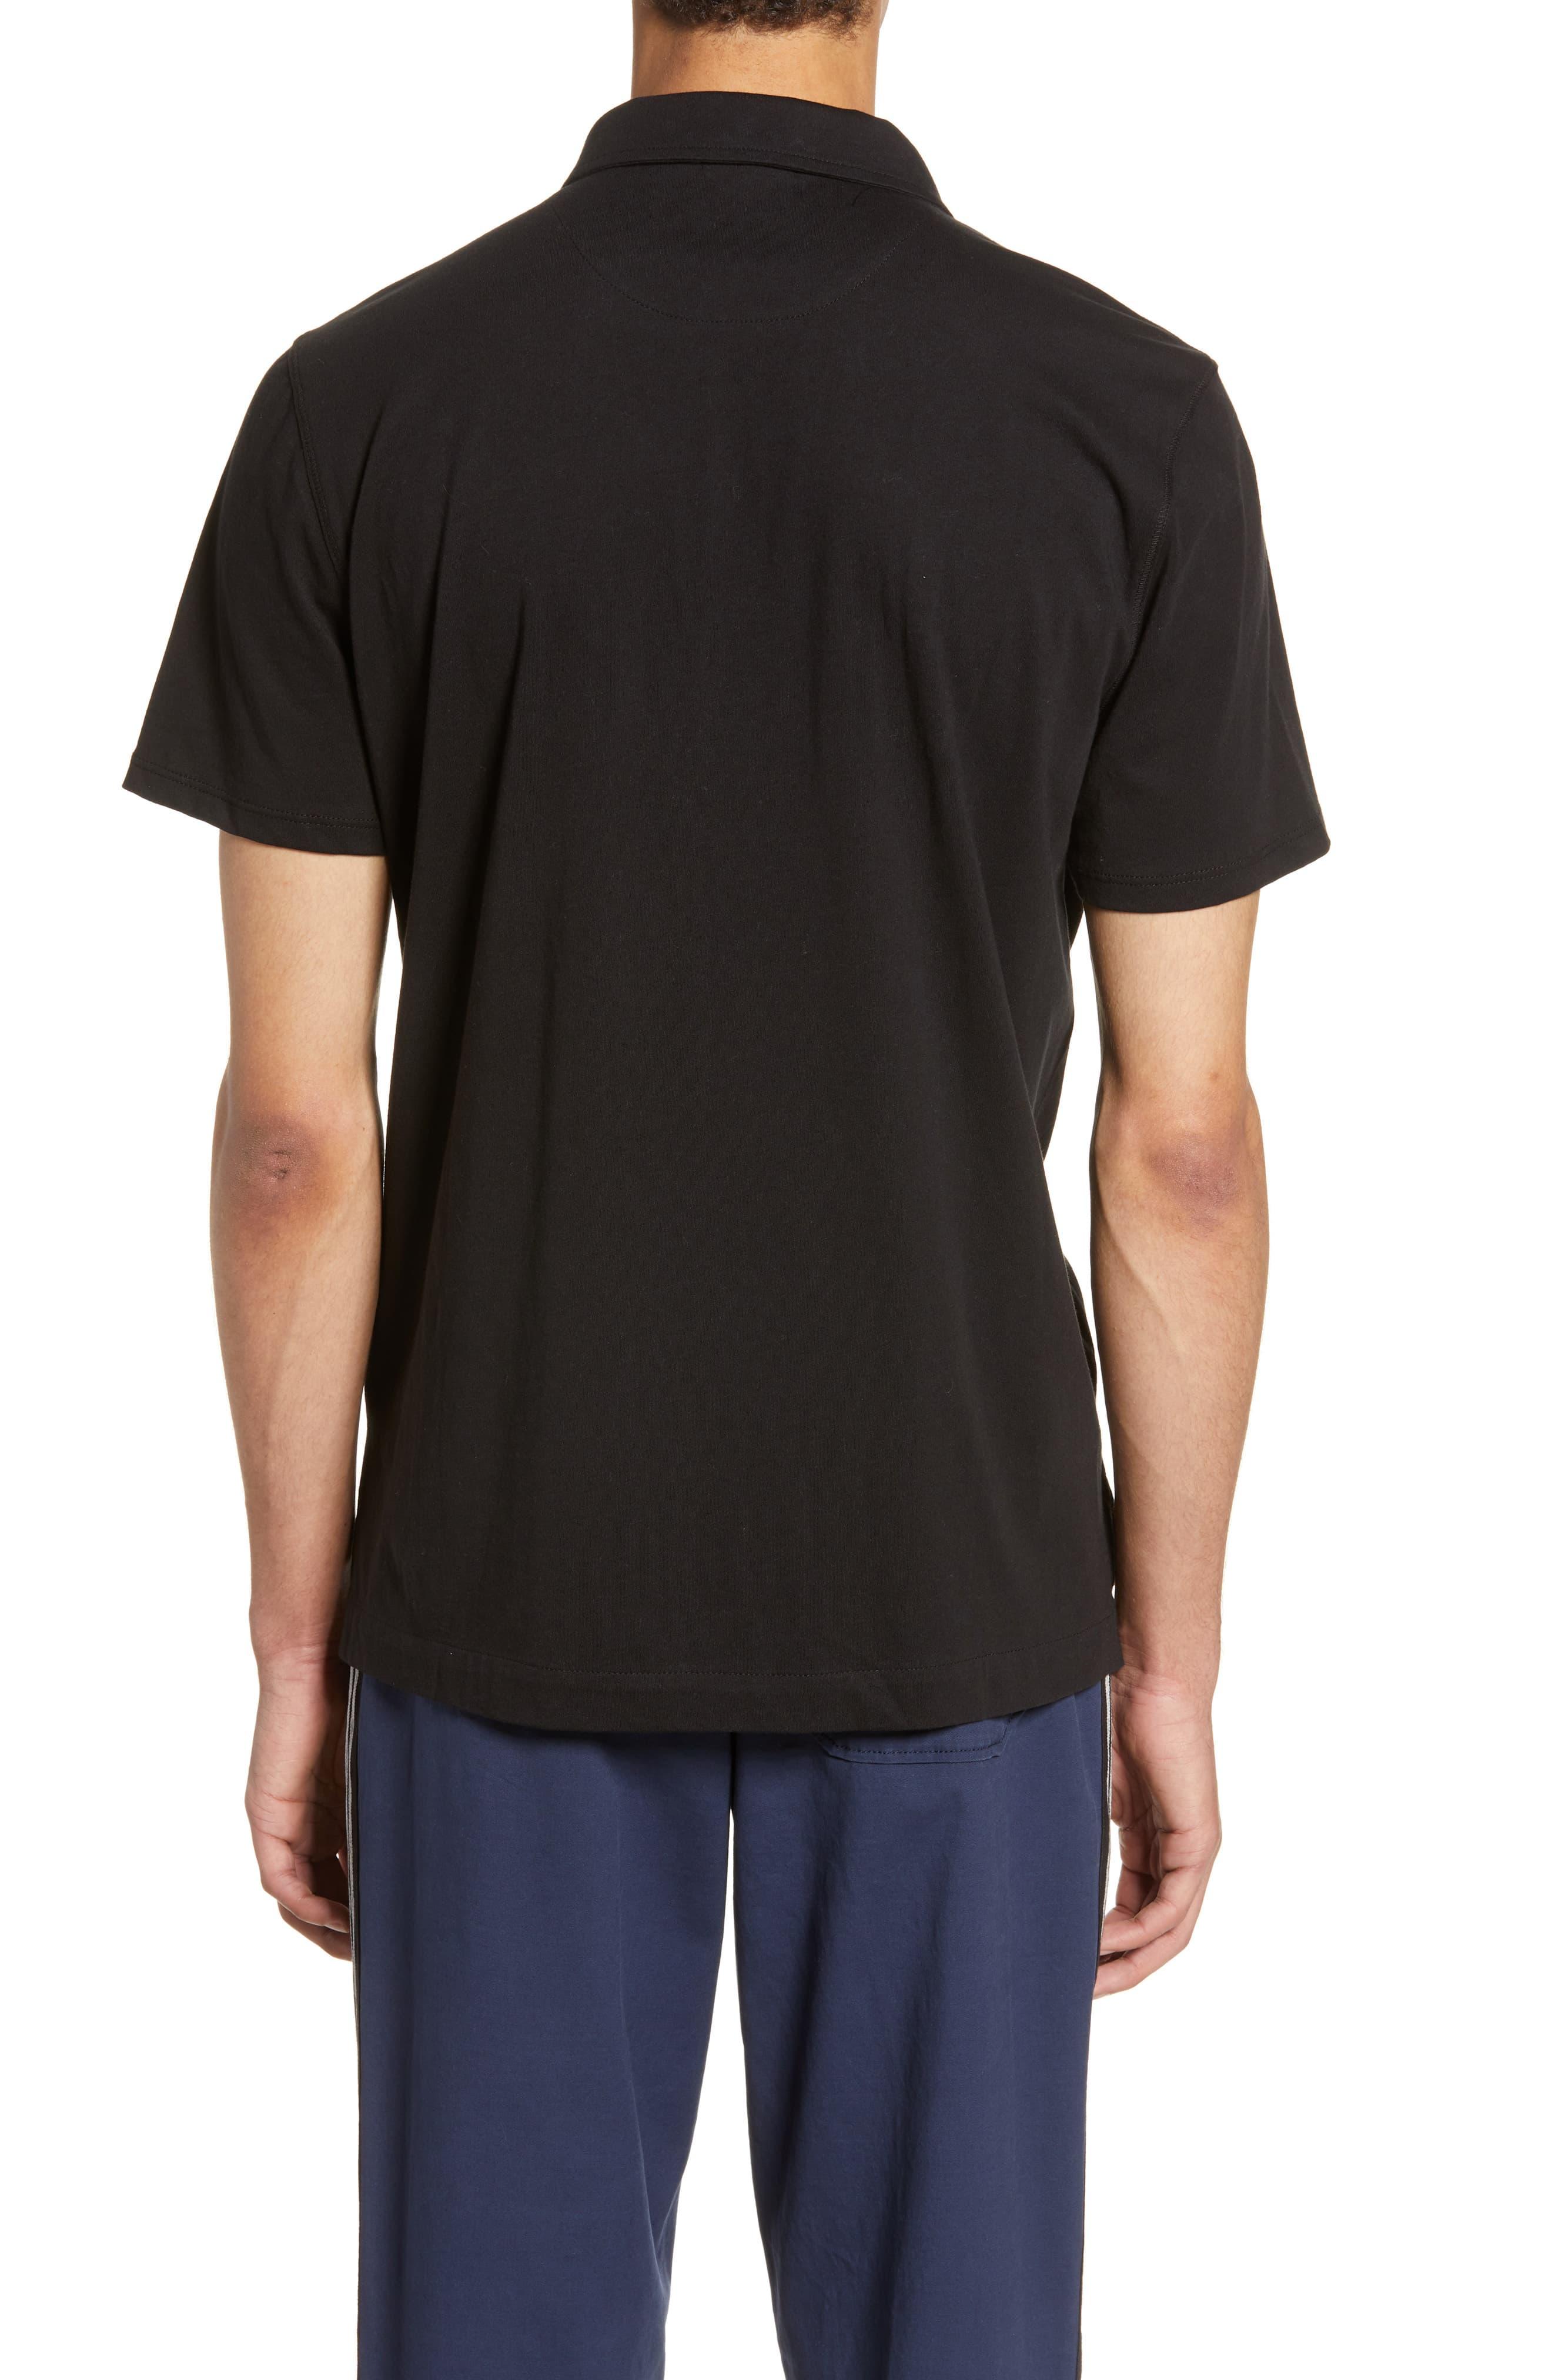 ATM Short Sleeve Jersey Polo in Black for Men - Lyst